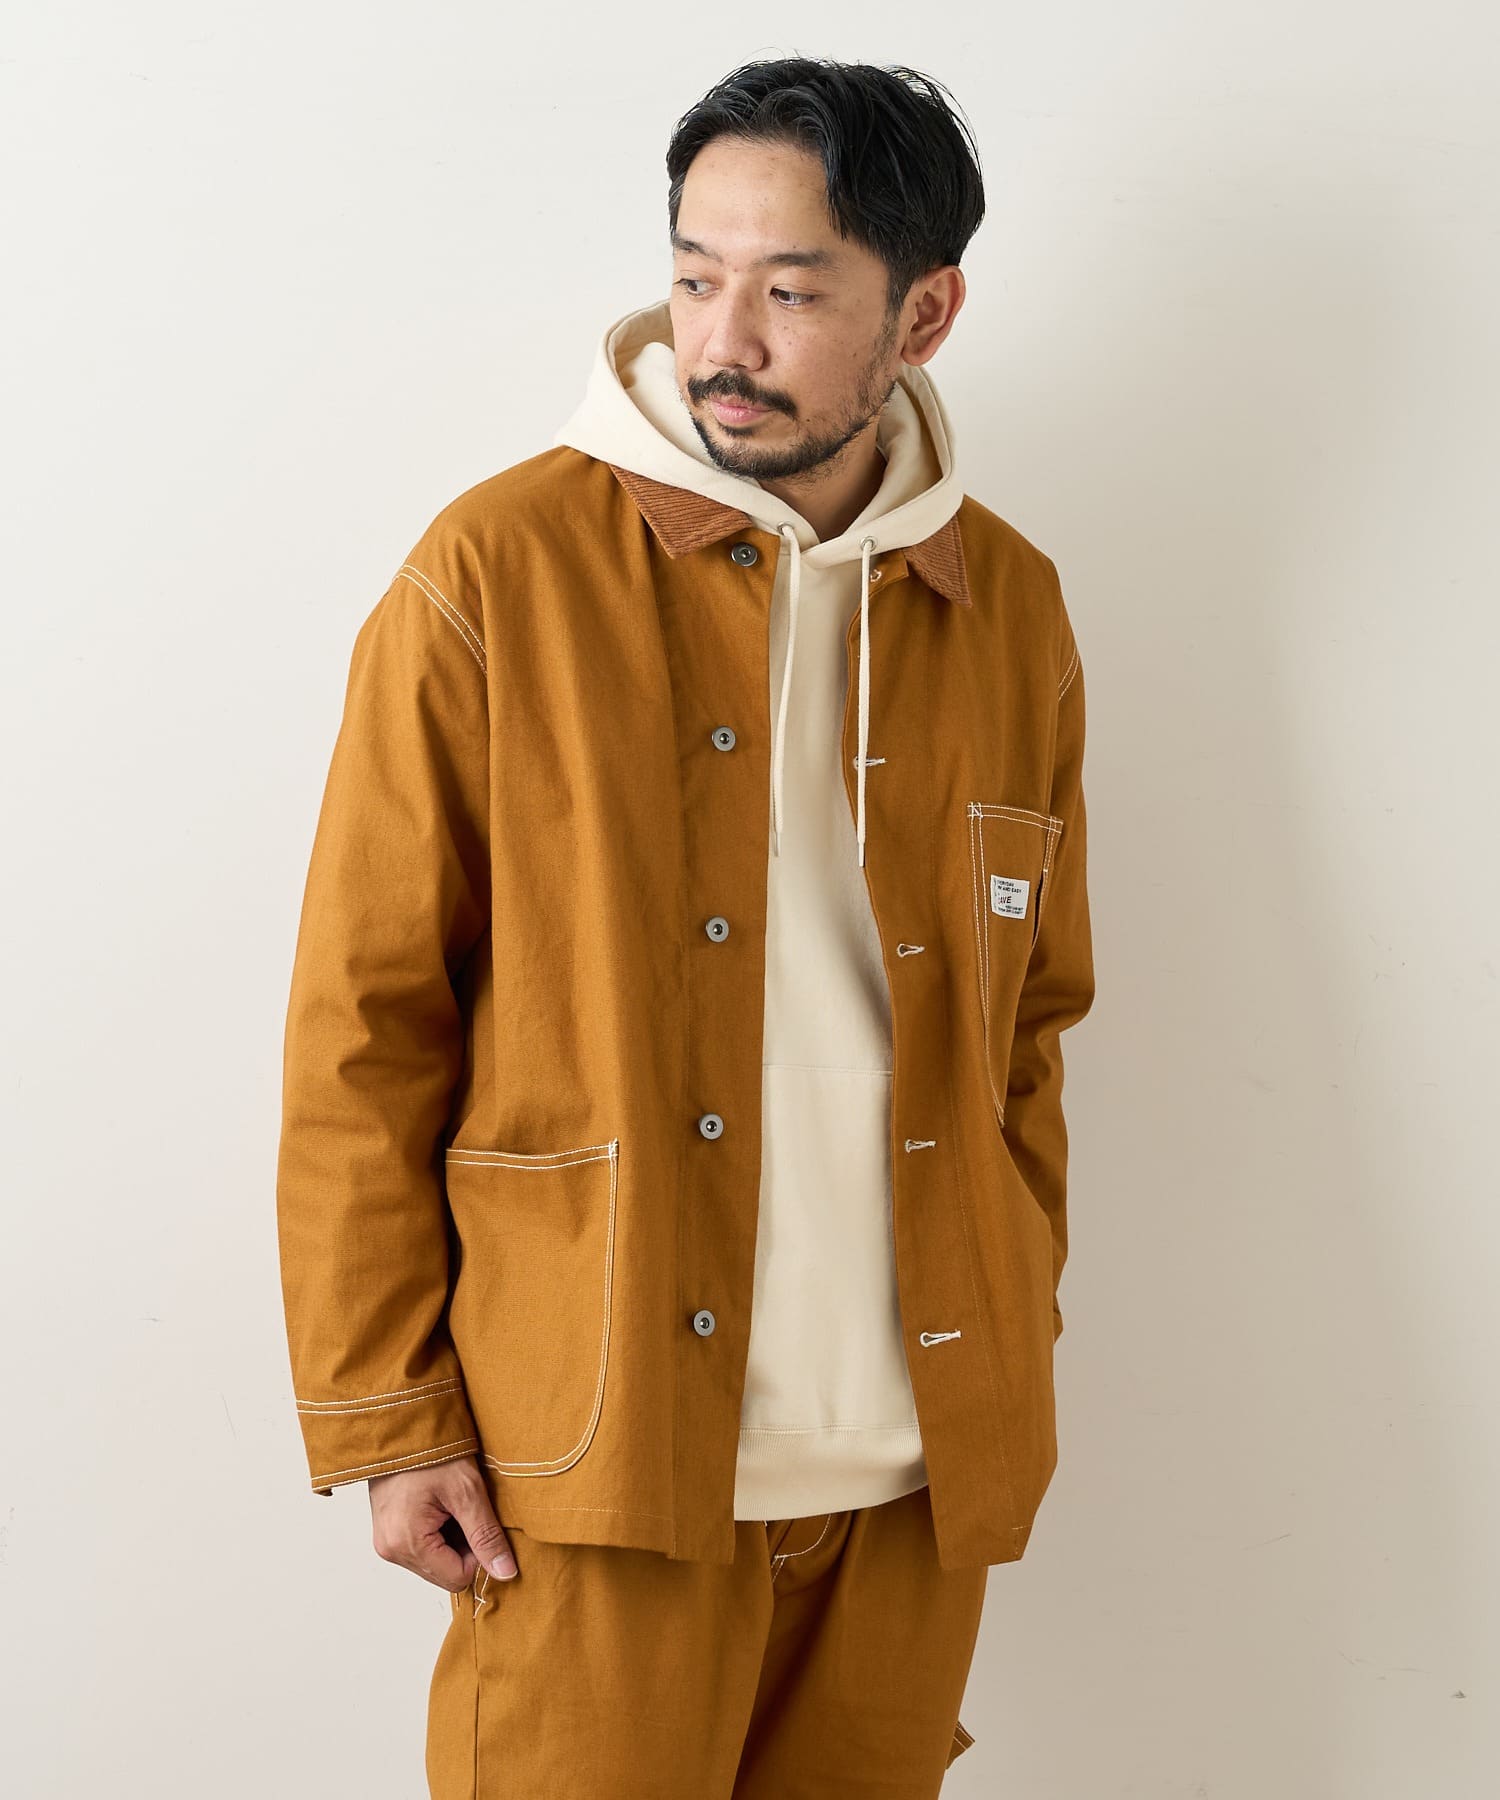 CIAOPANIC TYPY】CAVEダック カバーオールジャケット | OUTLET 